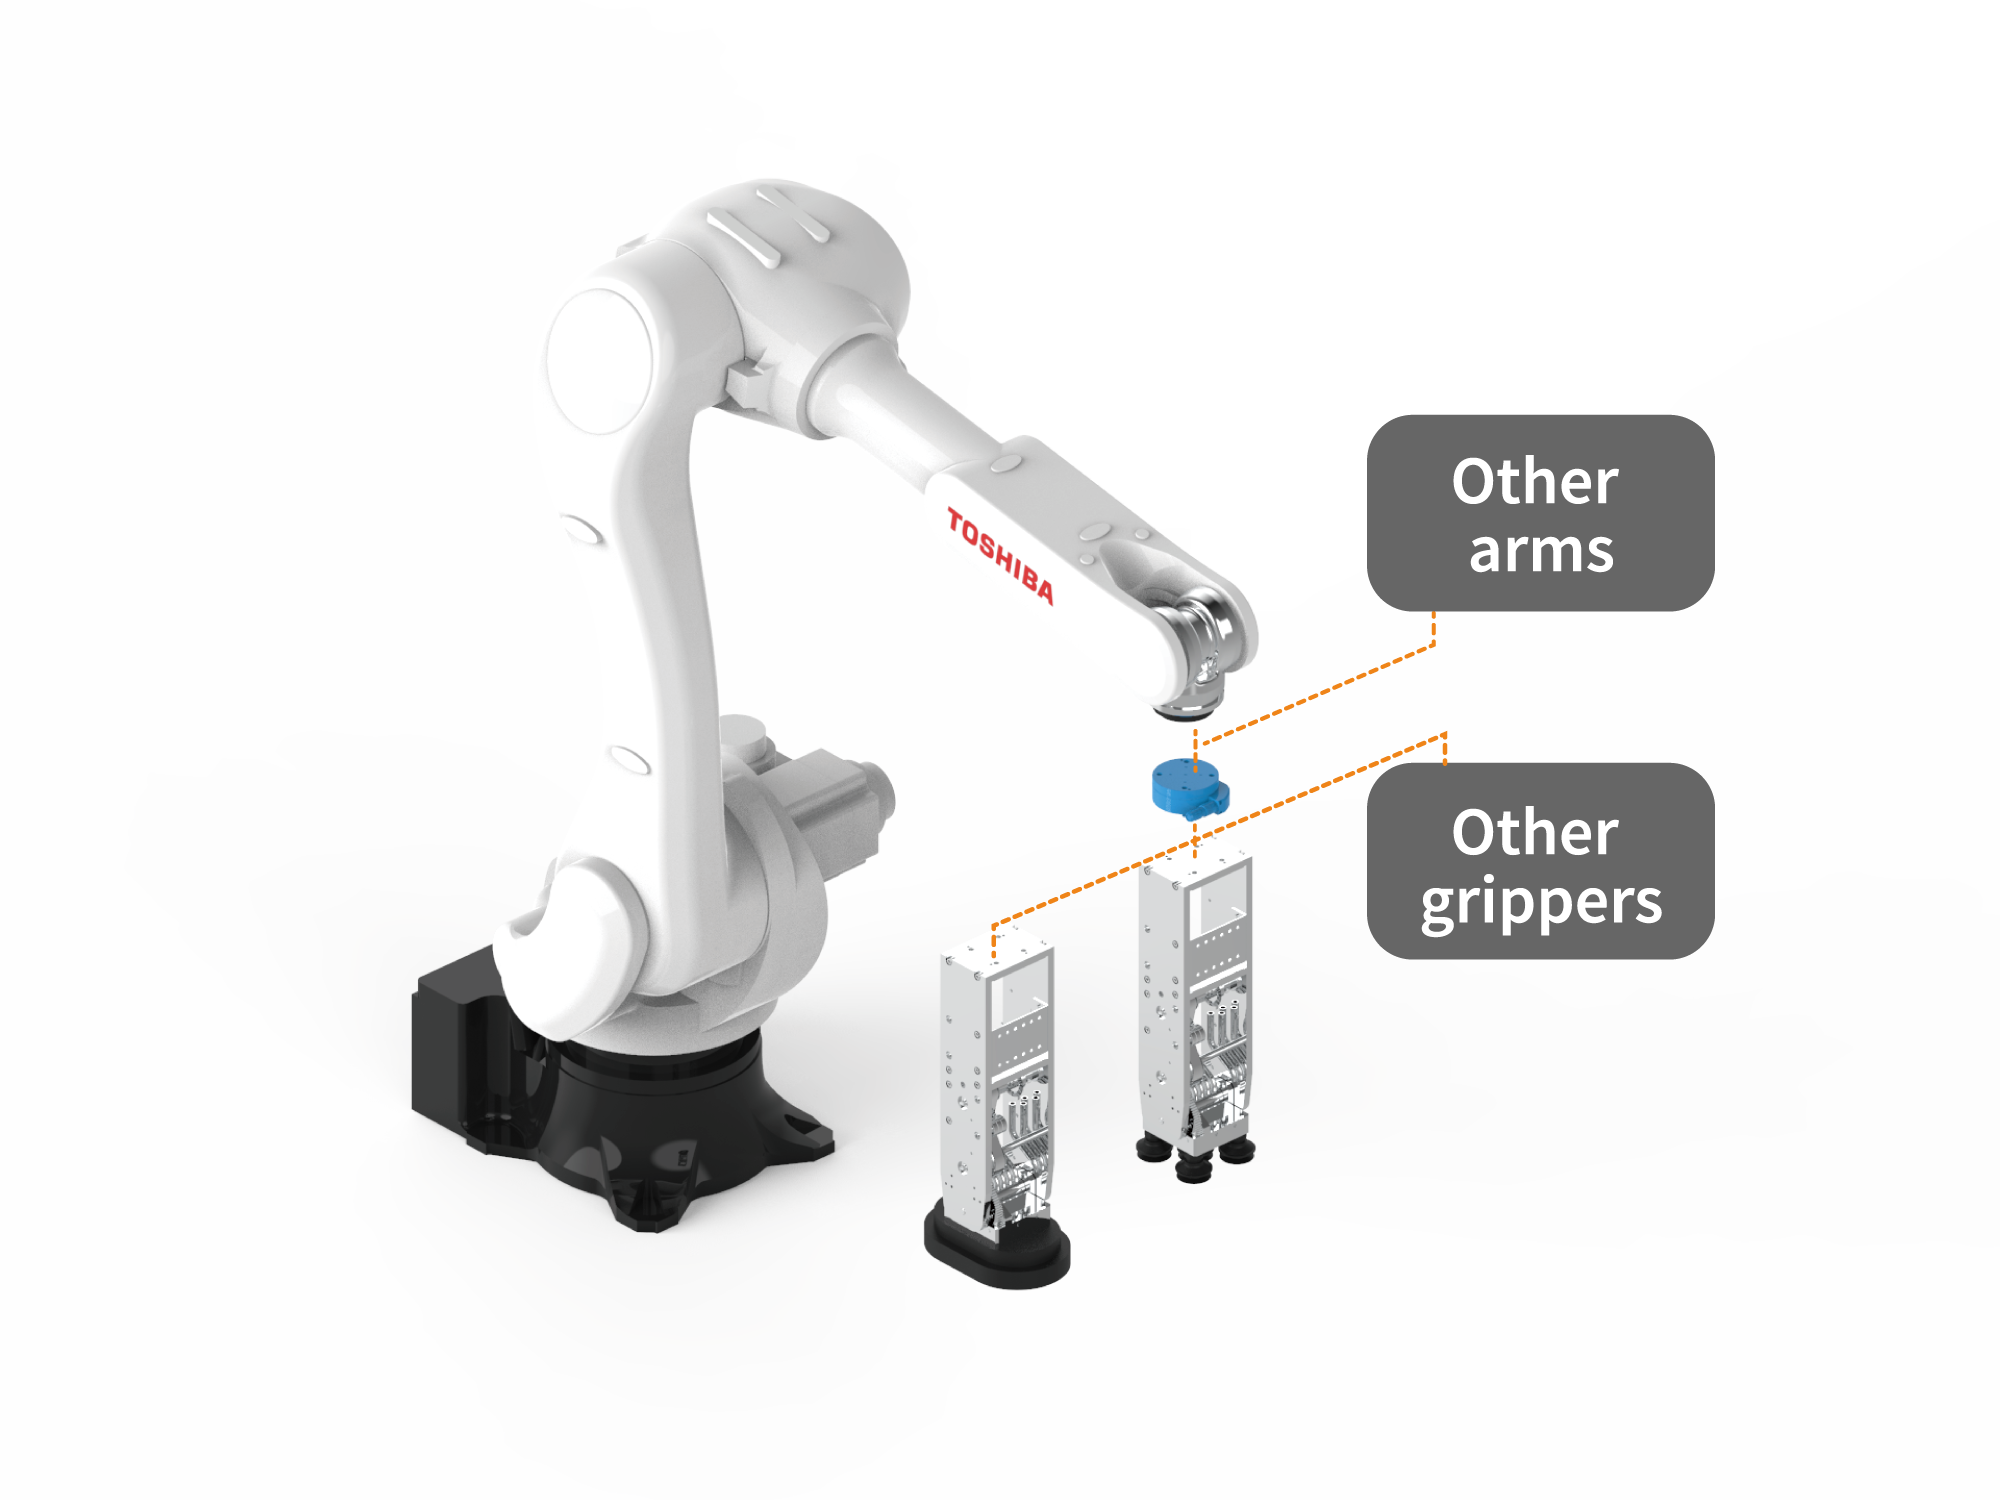 Adapt other arms and other grippers